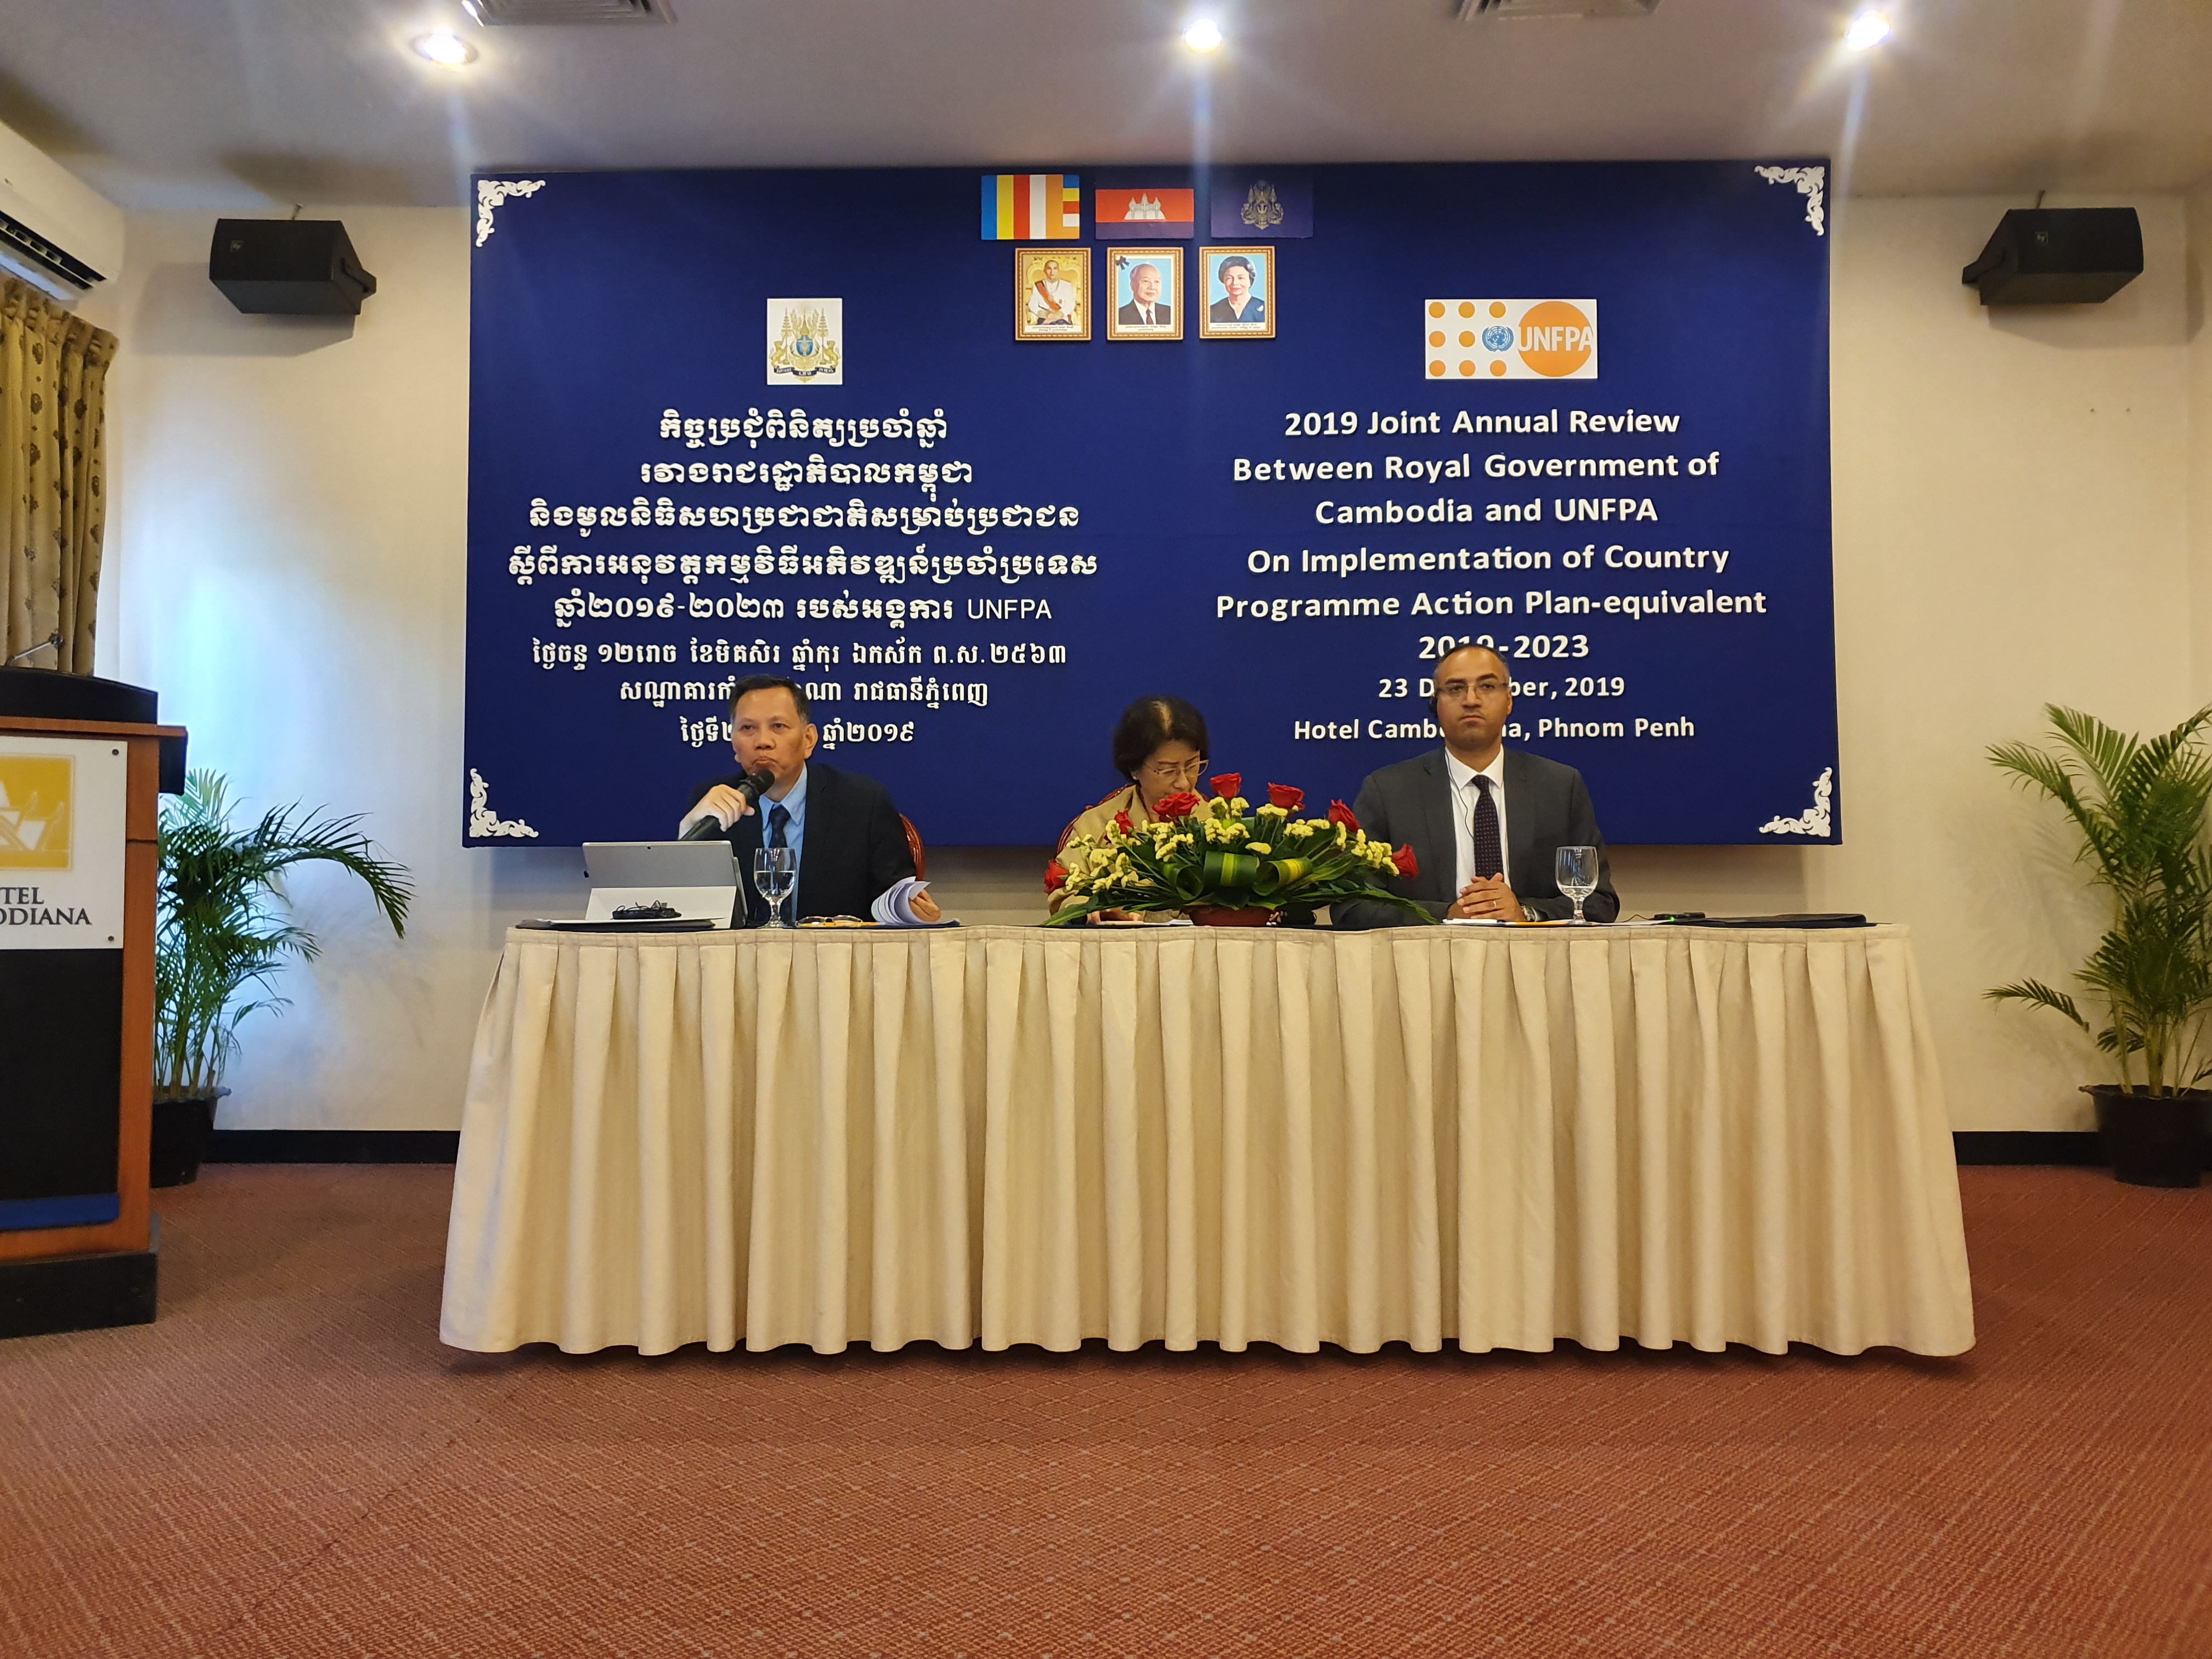 A meeting between the Royal Government of Cambodia and UNFPA